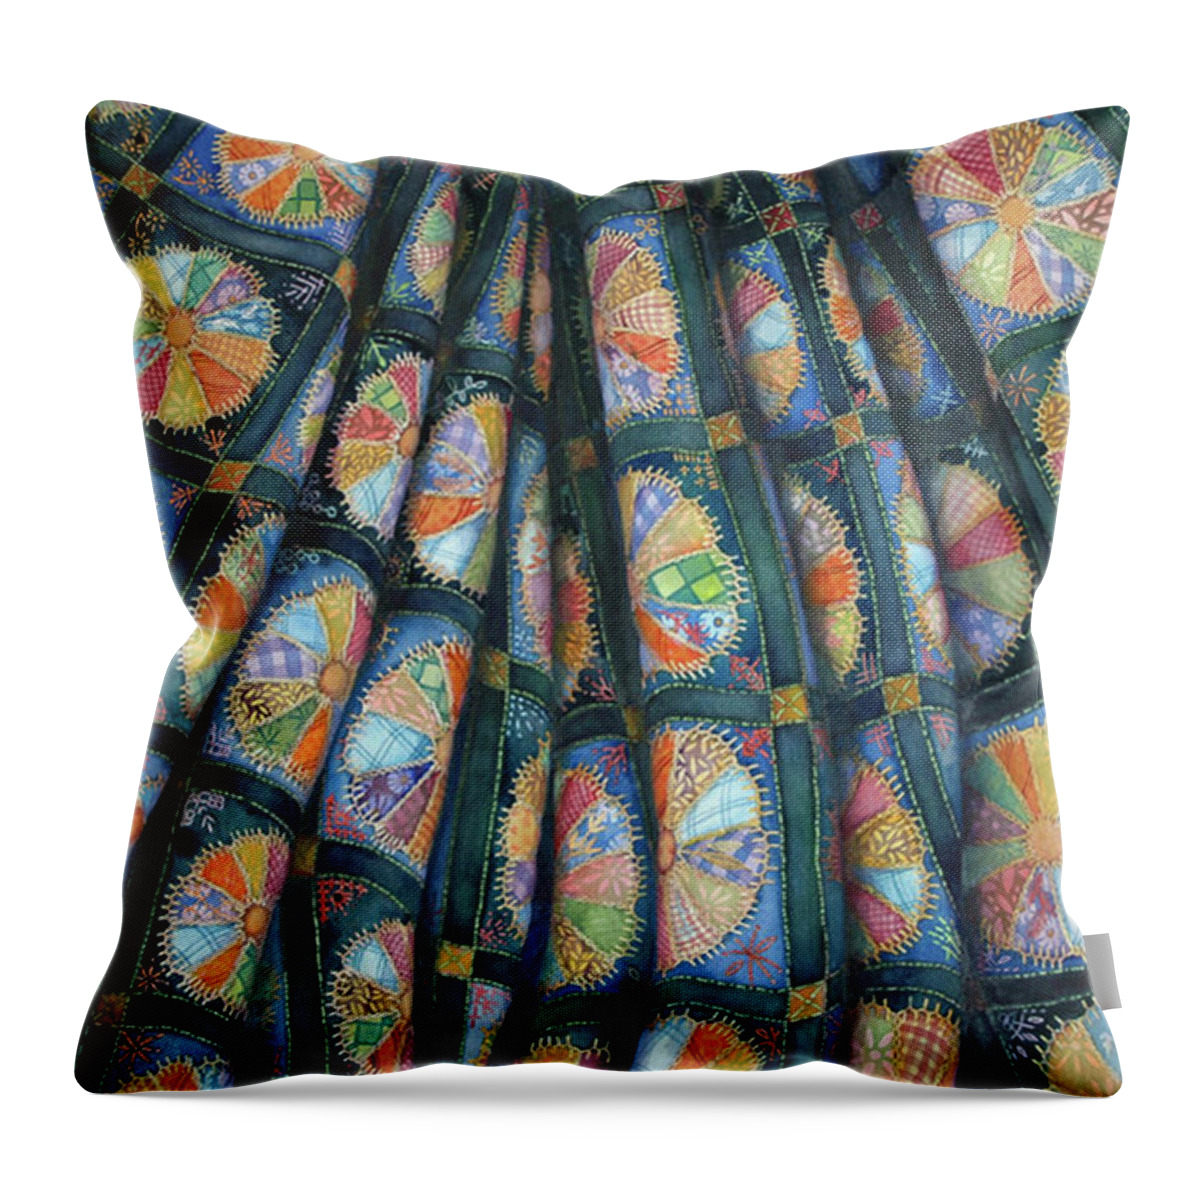 Watercolor Throw Pillow featuring the painting Dresden Plate Quilt by Helen Klebesadel